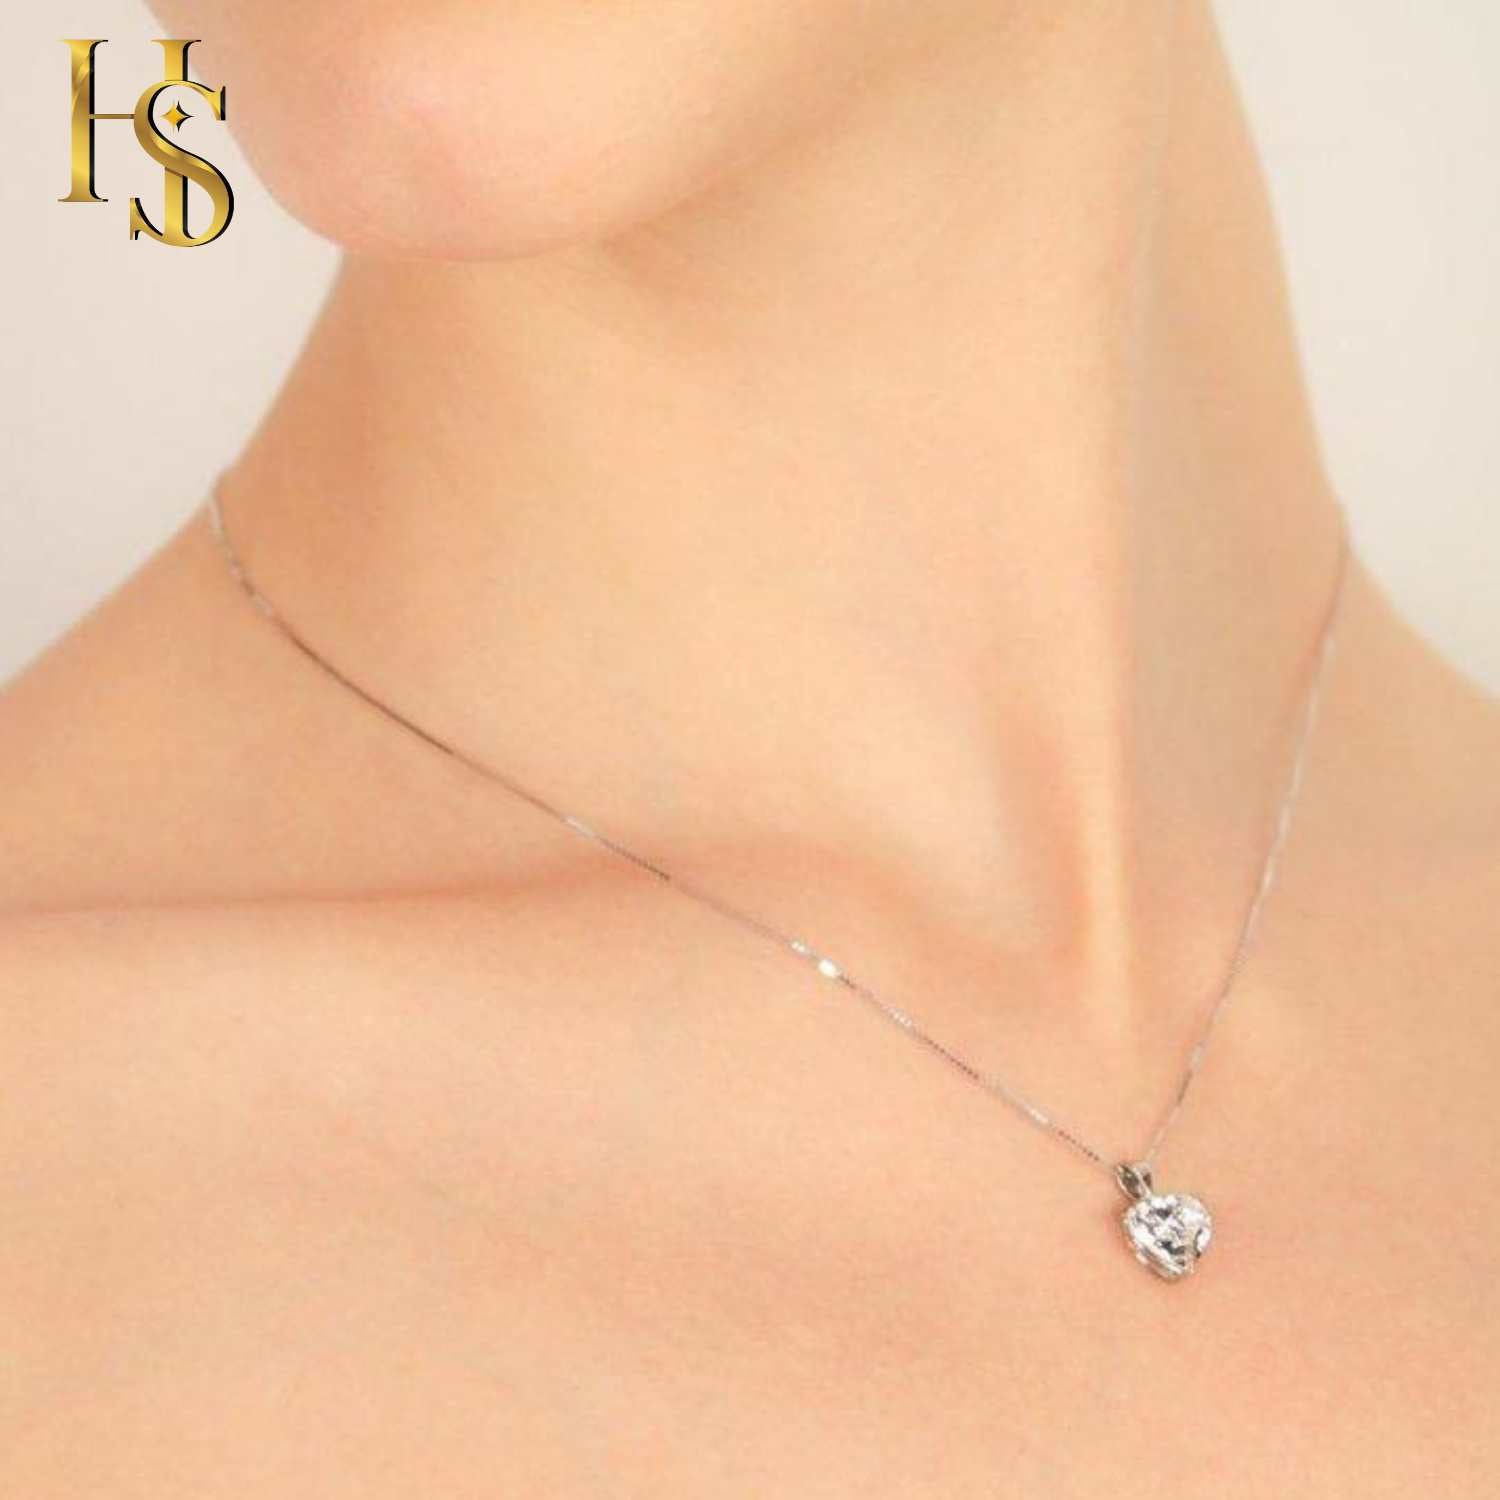 Heart Solitaire Pendant with Chain in 92.5 Silver embellished with Swarovski Zirconia